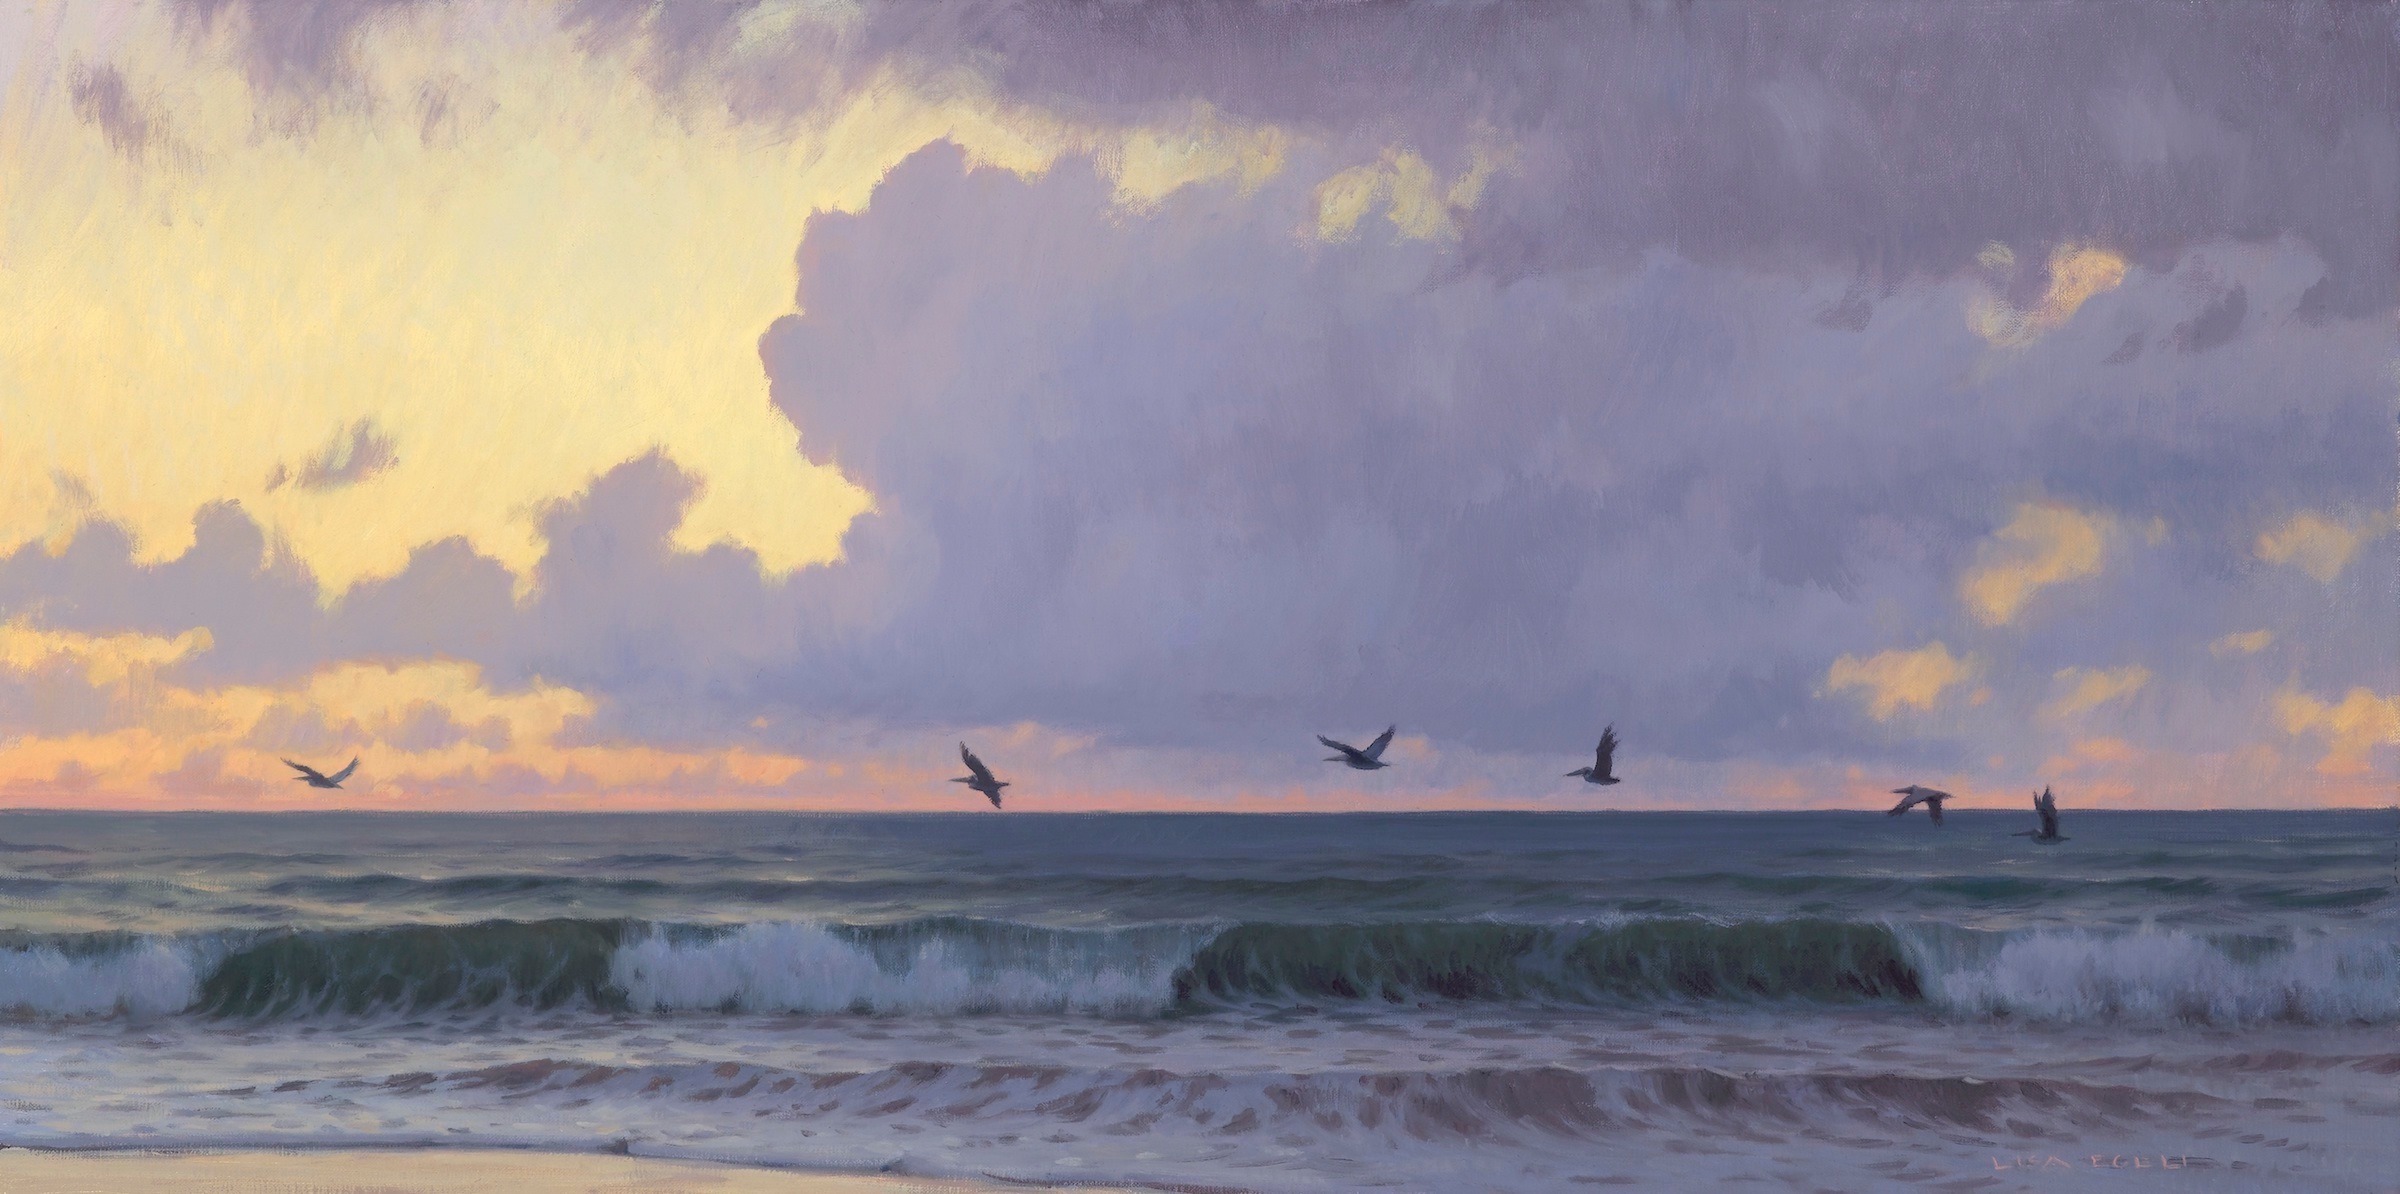 Realism Live - Lisa Egeli, "Good Things Come," Oil, 18 x 36 in.